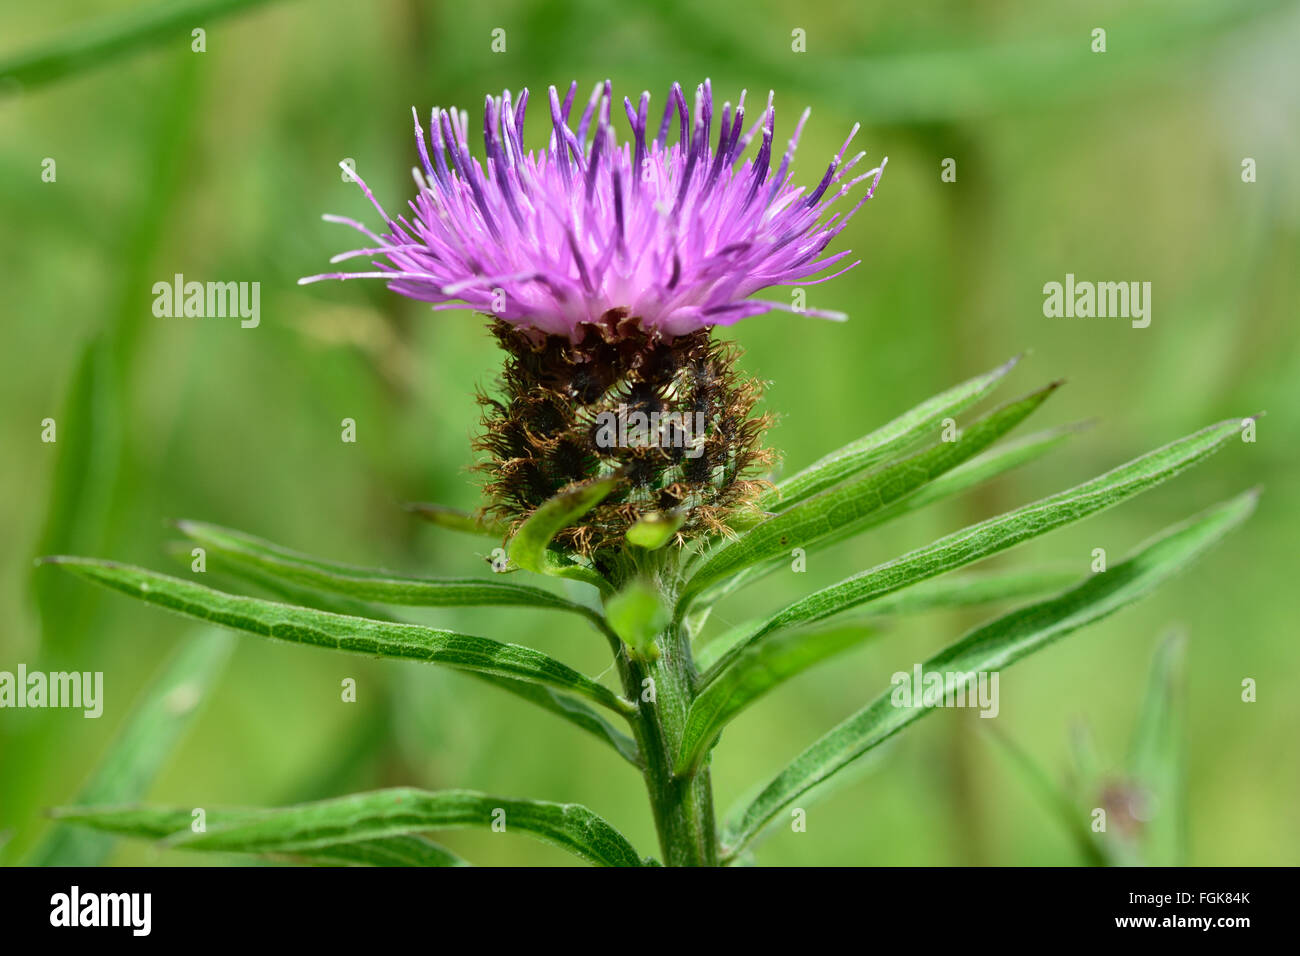 Black knapweed (Centaurea nigra). A purple plant in the daisy family (Asteraceae) in flower, with focus on stamens Stock Photo